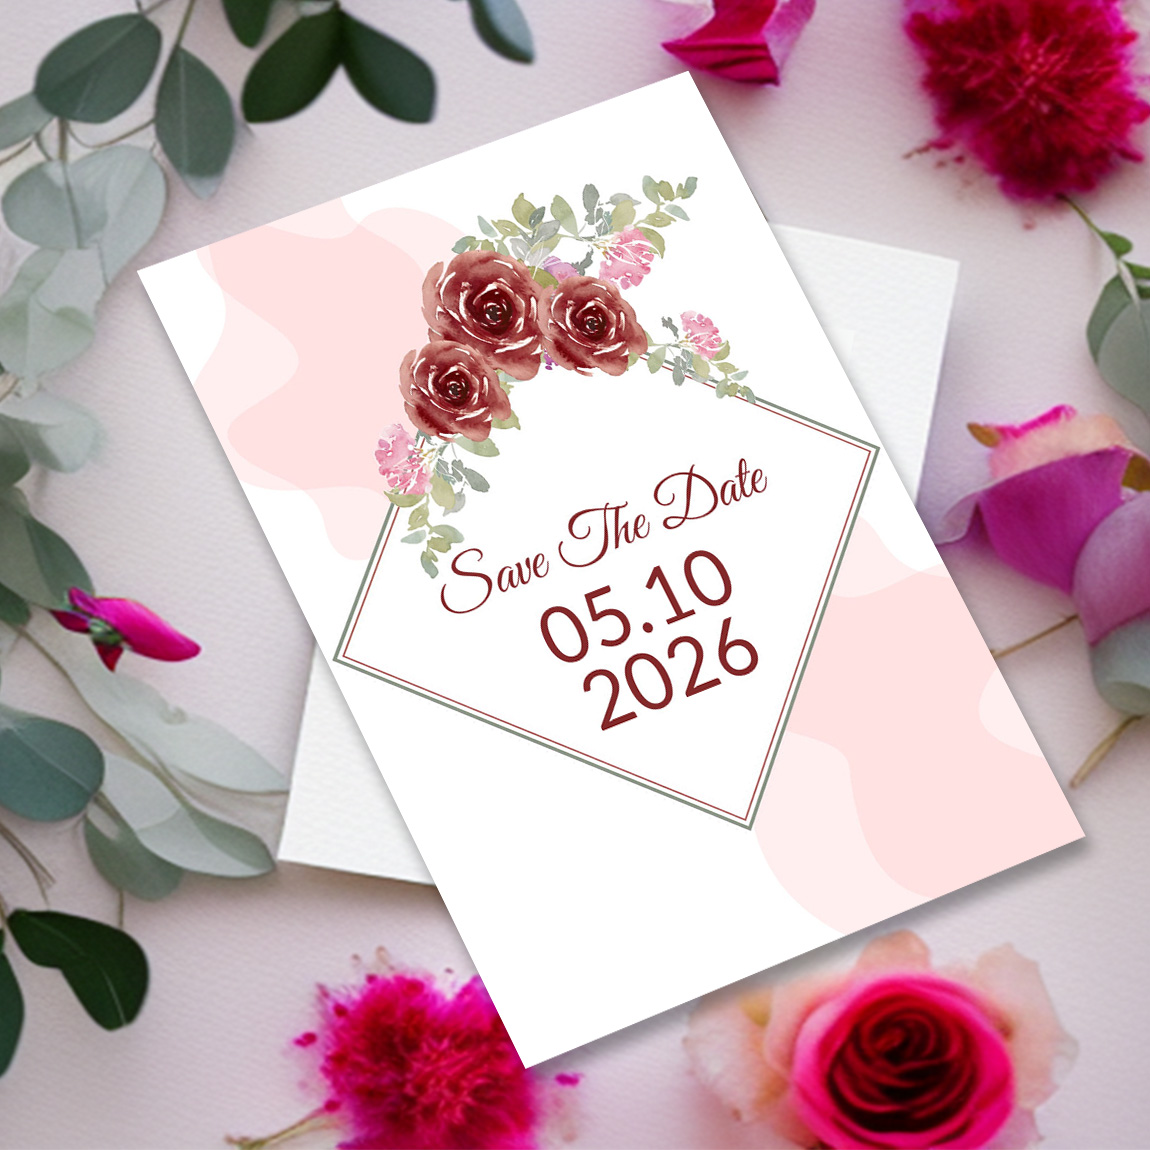 Image of gorgeous wedding invitation with floral design.